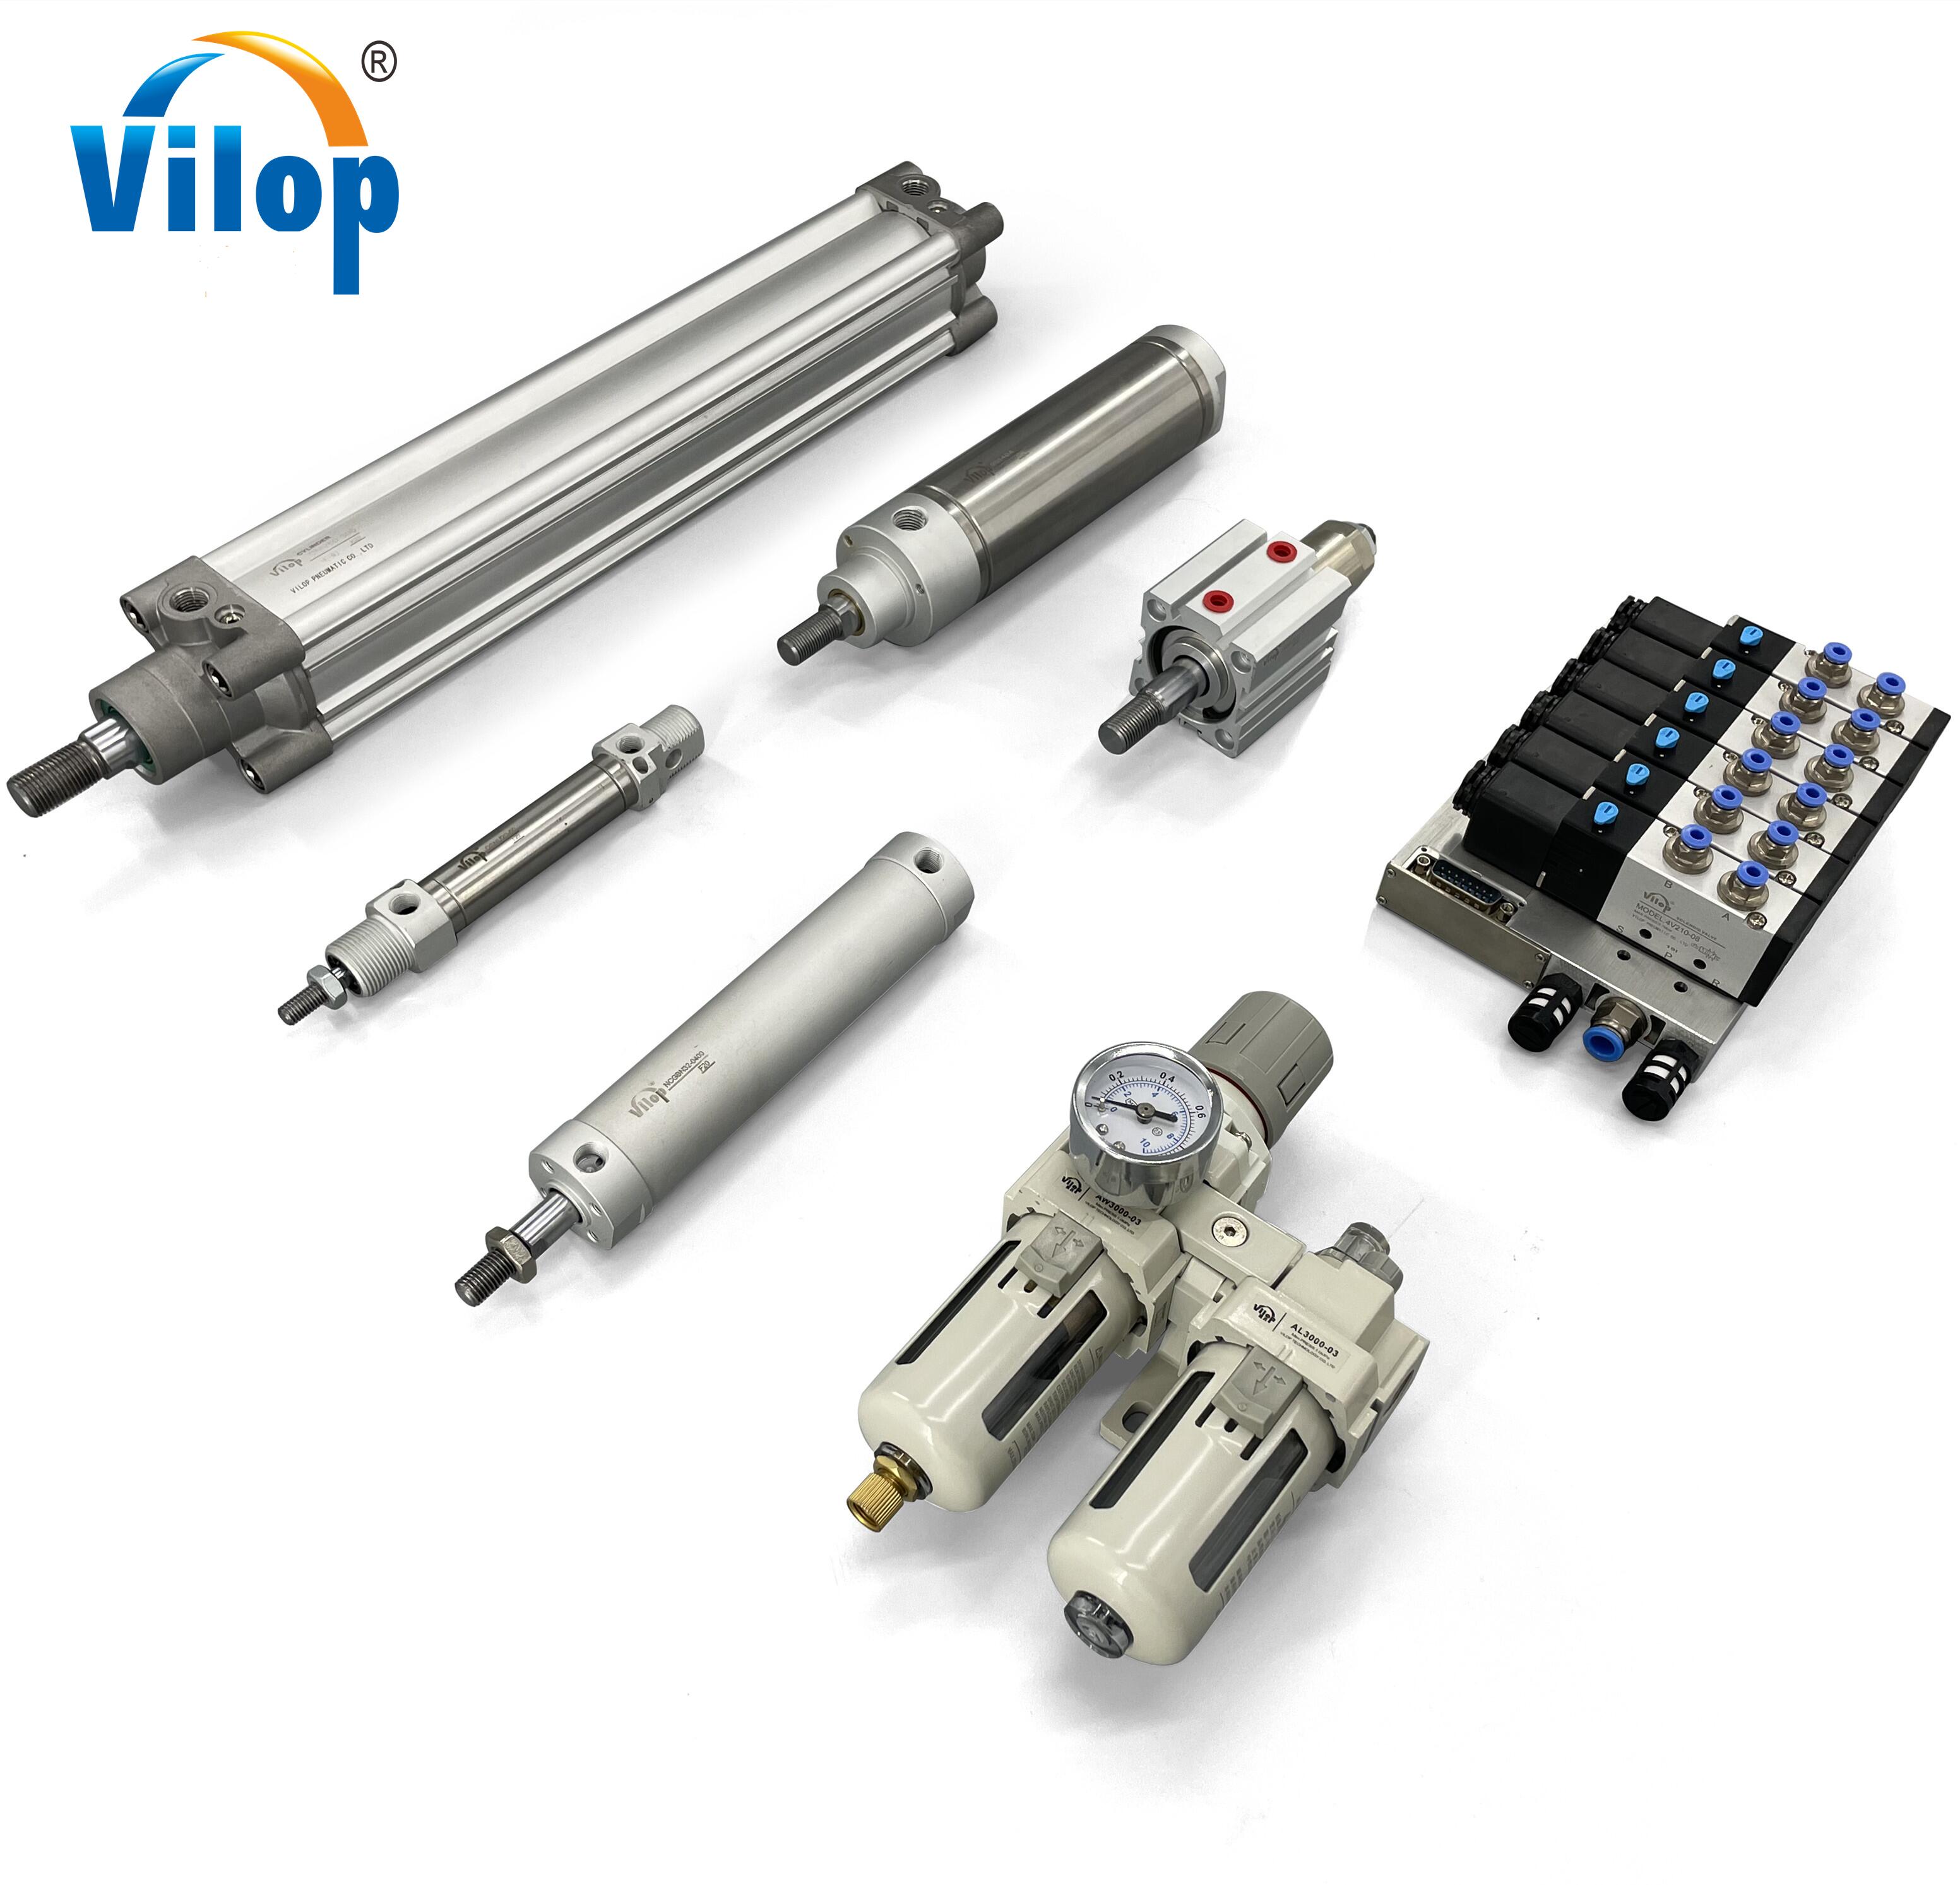 What Are The Components Of The Pneumatic System?